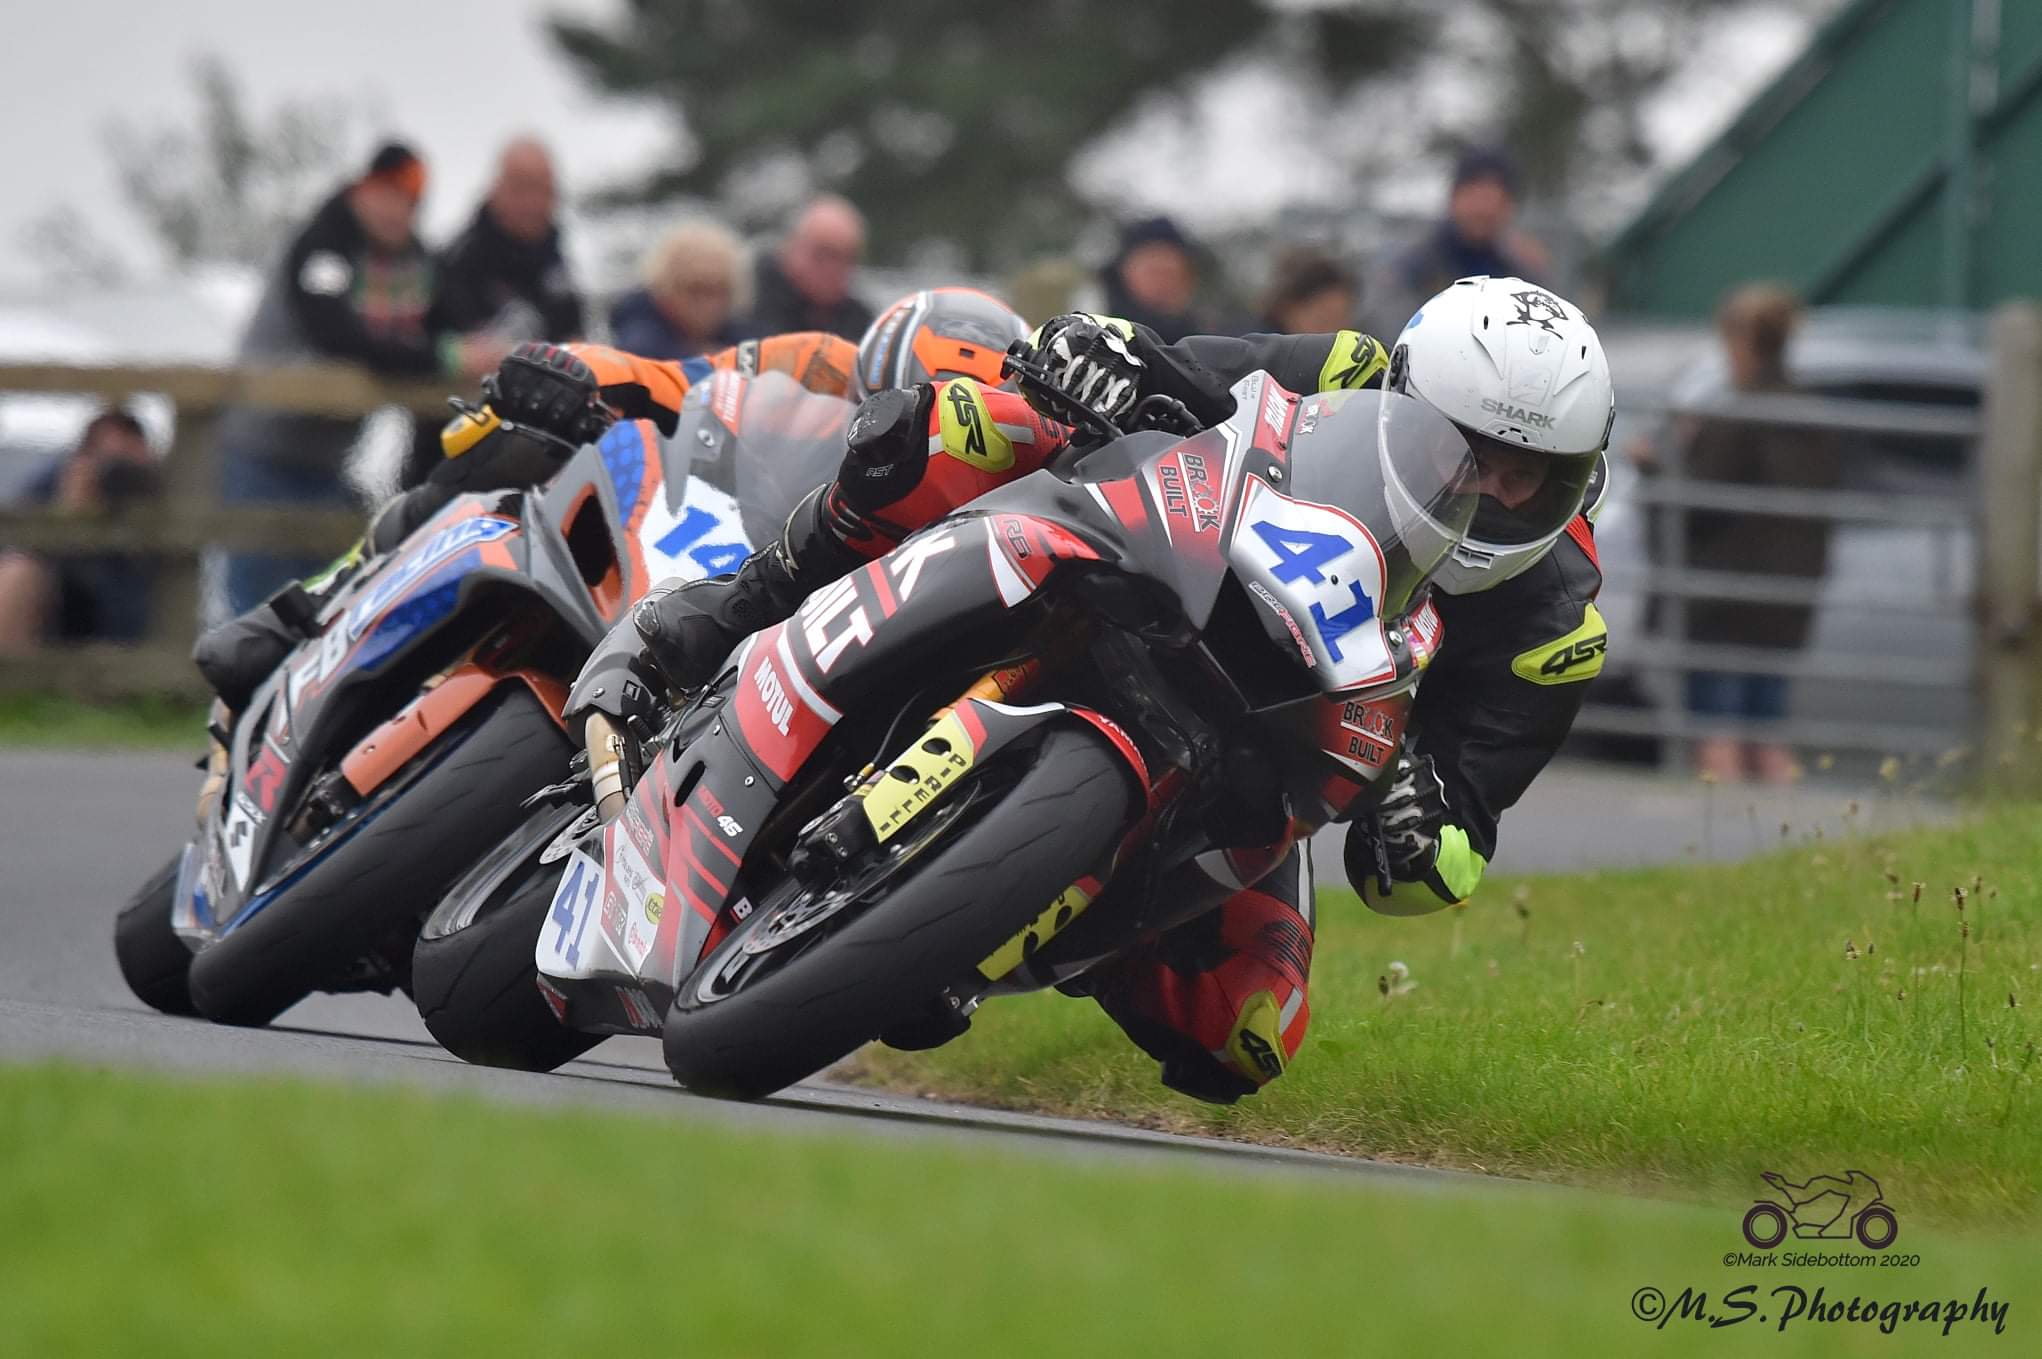 Barry Sheene Classic – Brook Reflects On Latest Scarborough Venture